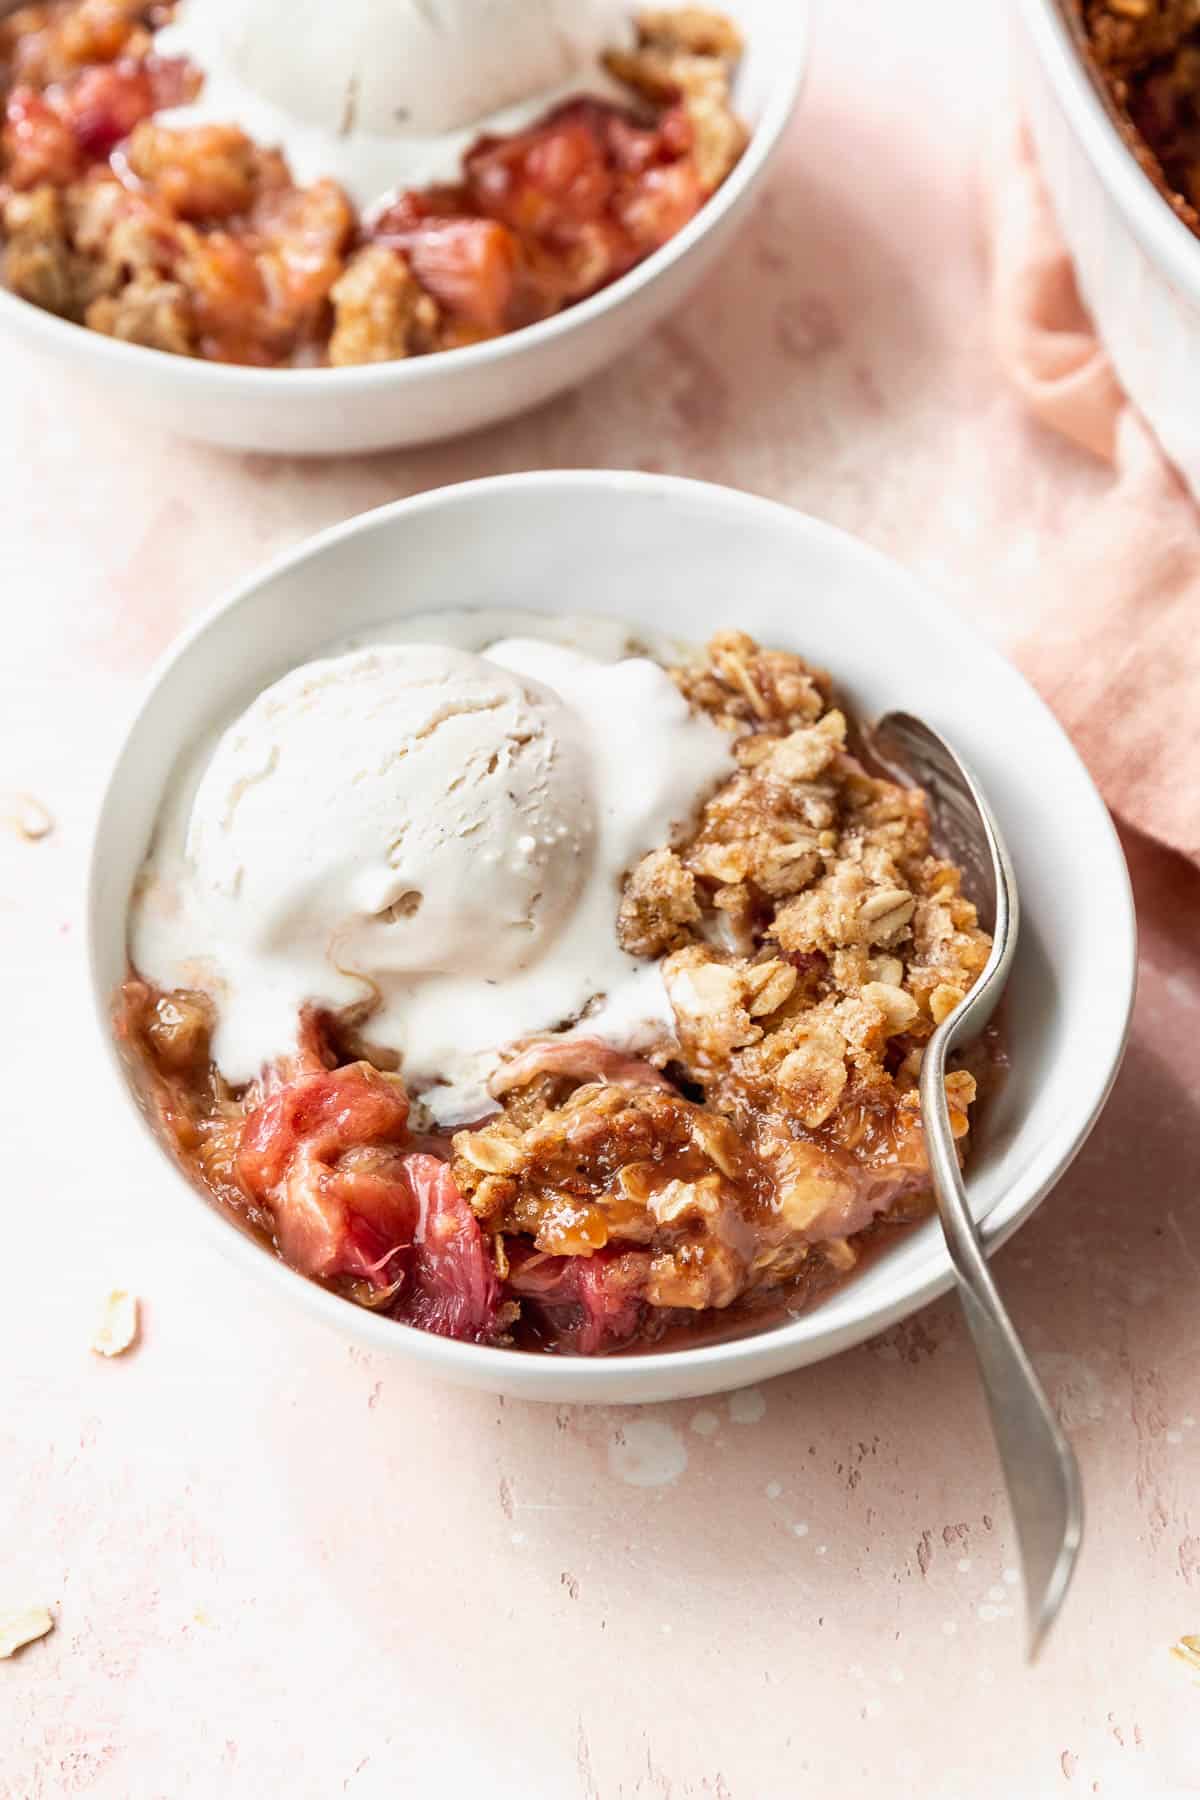 45 degree angle shot of a white bowl filled with gluten-free rhubarb crisp with oats crumble topping and a scoop of vanilla ice cream on a pink table.